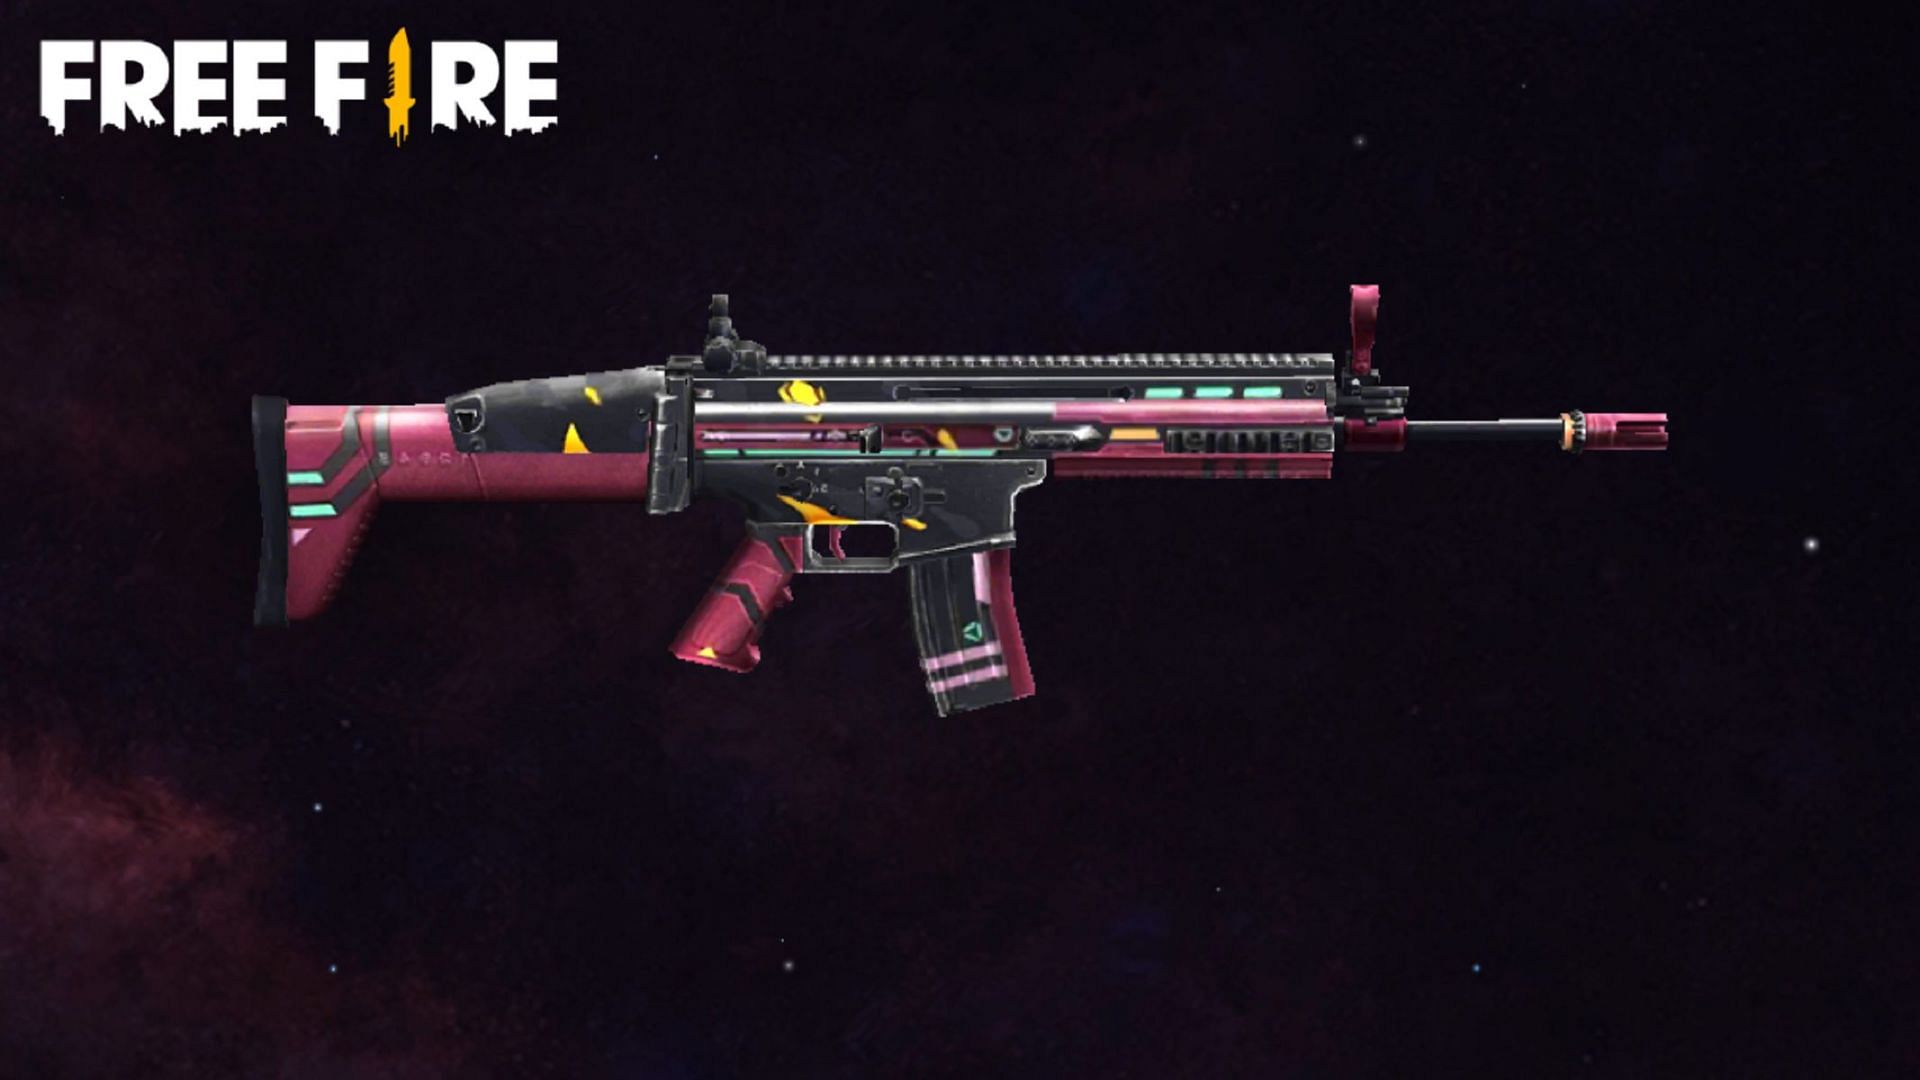 This skin can be acquired from the loot crate (Image via Free Fire)